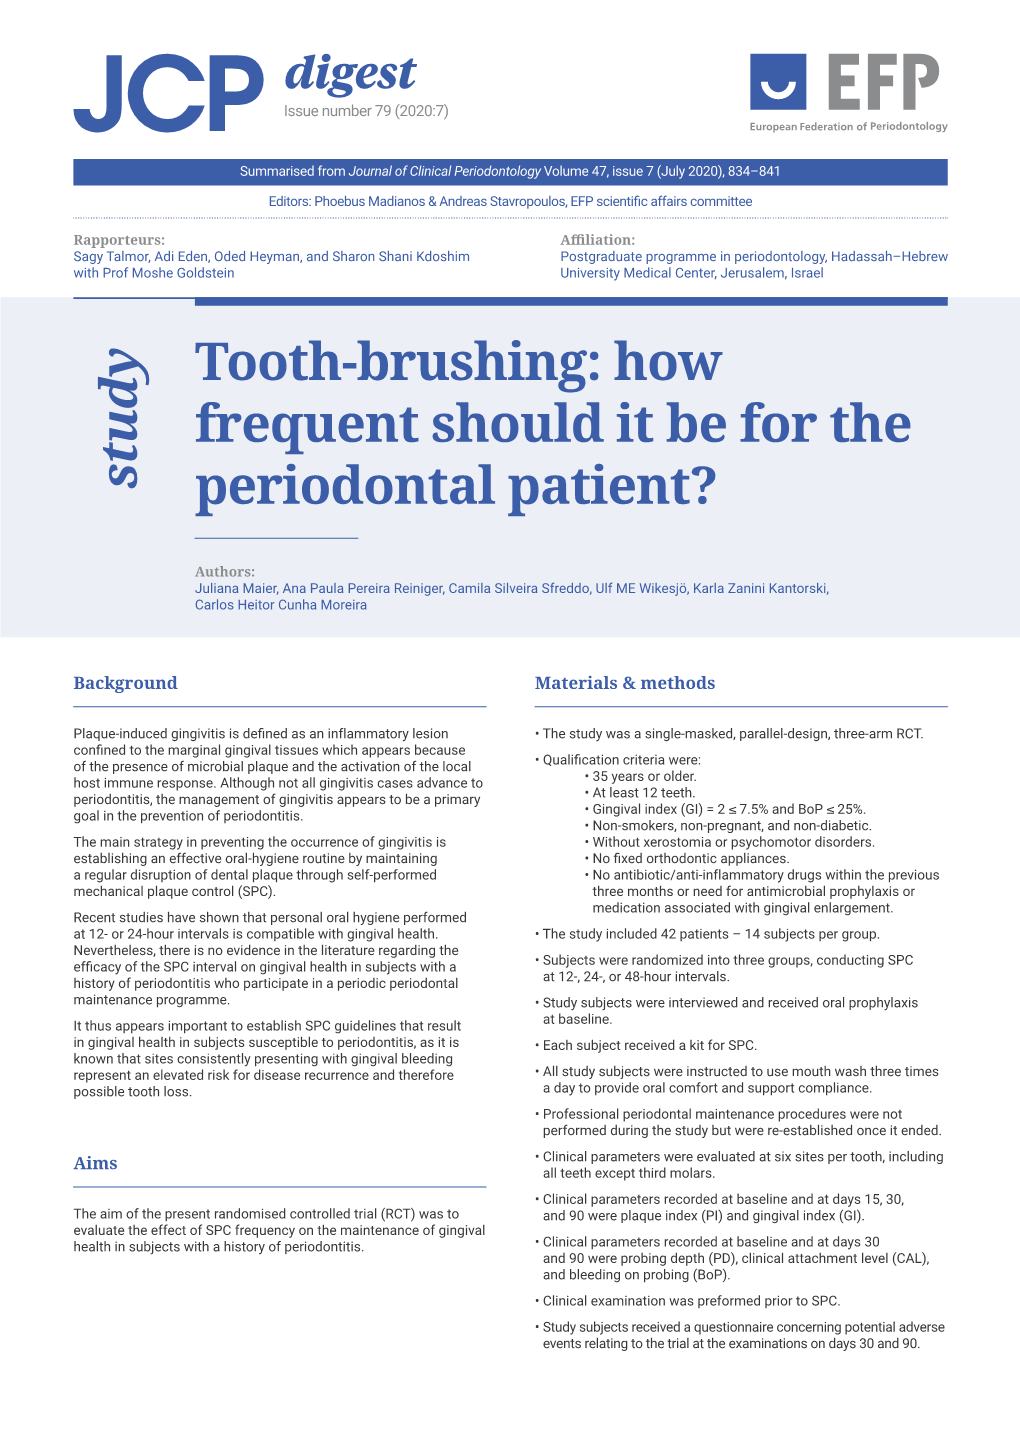 Tooth-Brushing: How Frequent Should It Be for the Periodontal Patient? Study